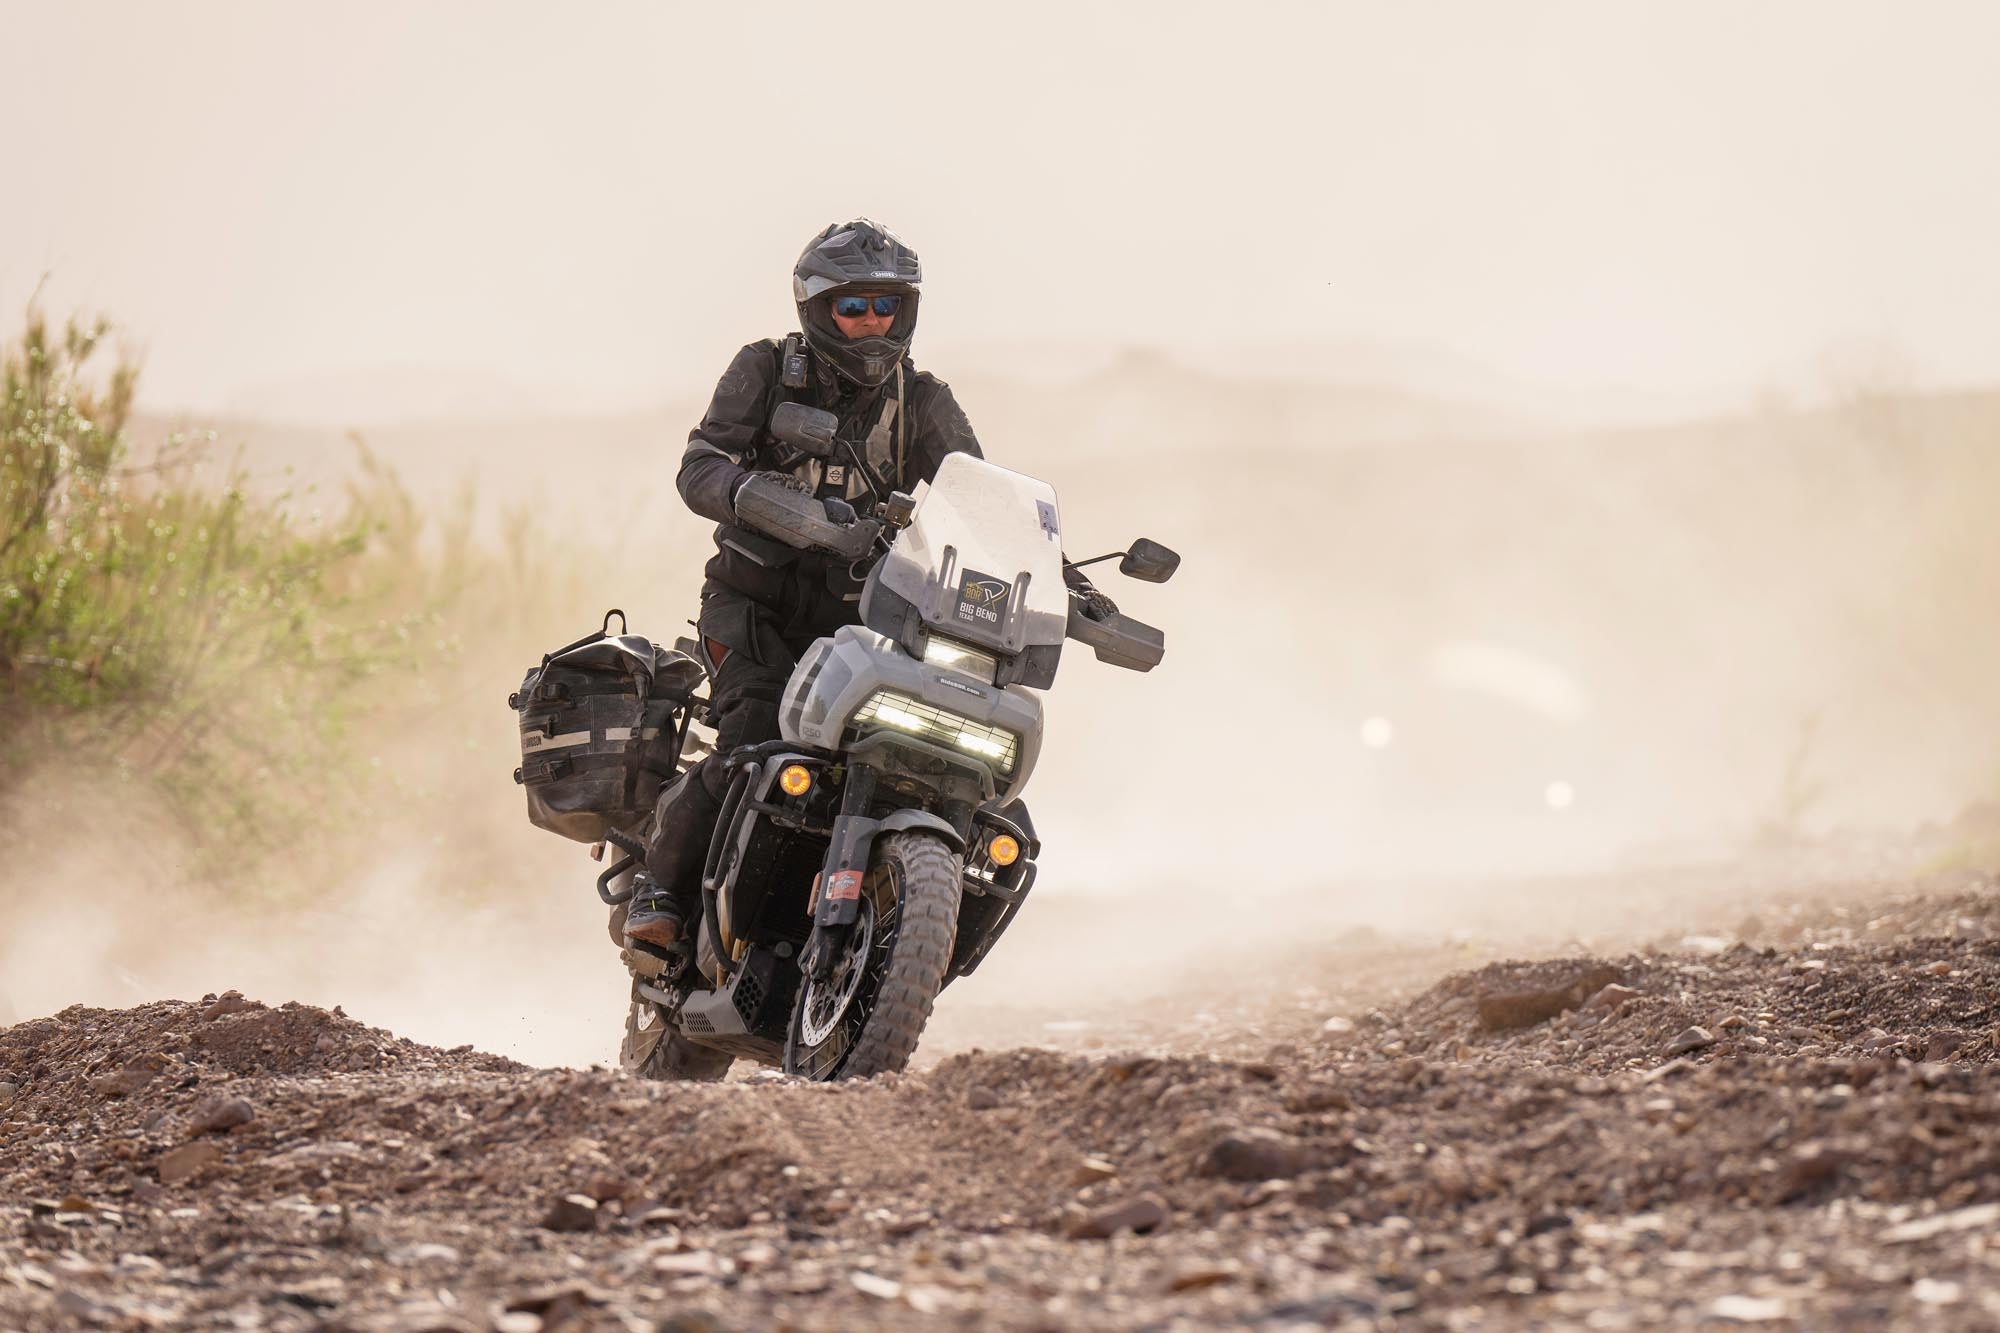 Backcountry Discovery Routes Announces Harley-Davidson Motor Company as Its Newest OEM Sponsor